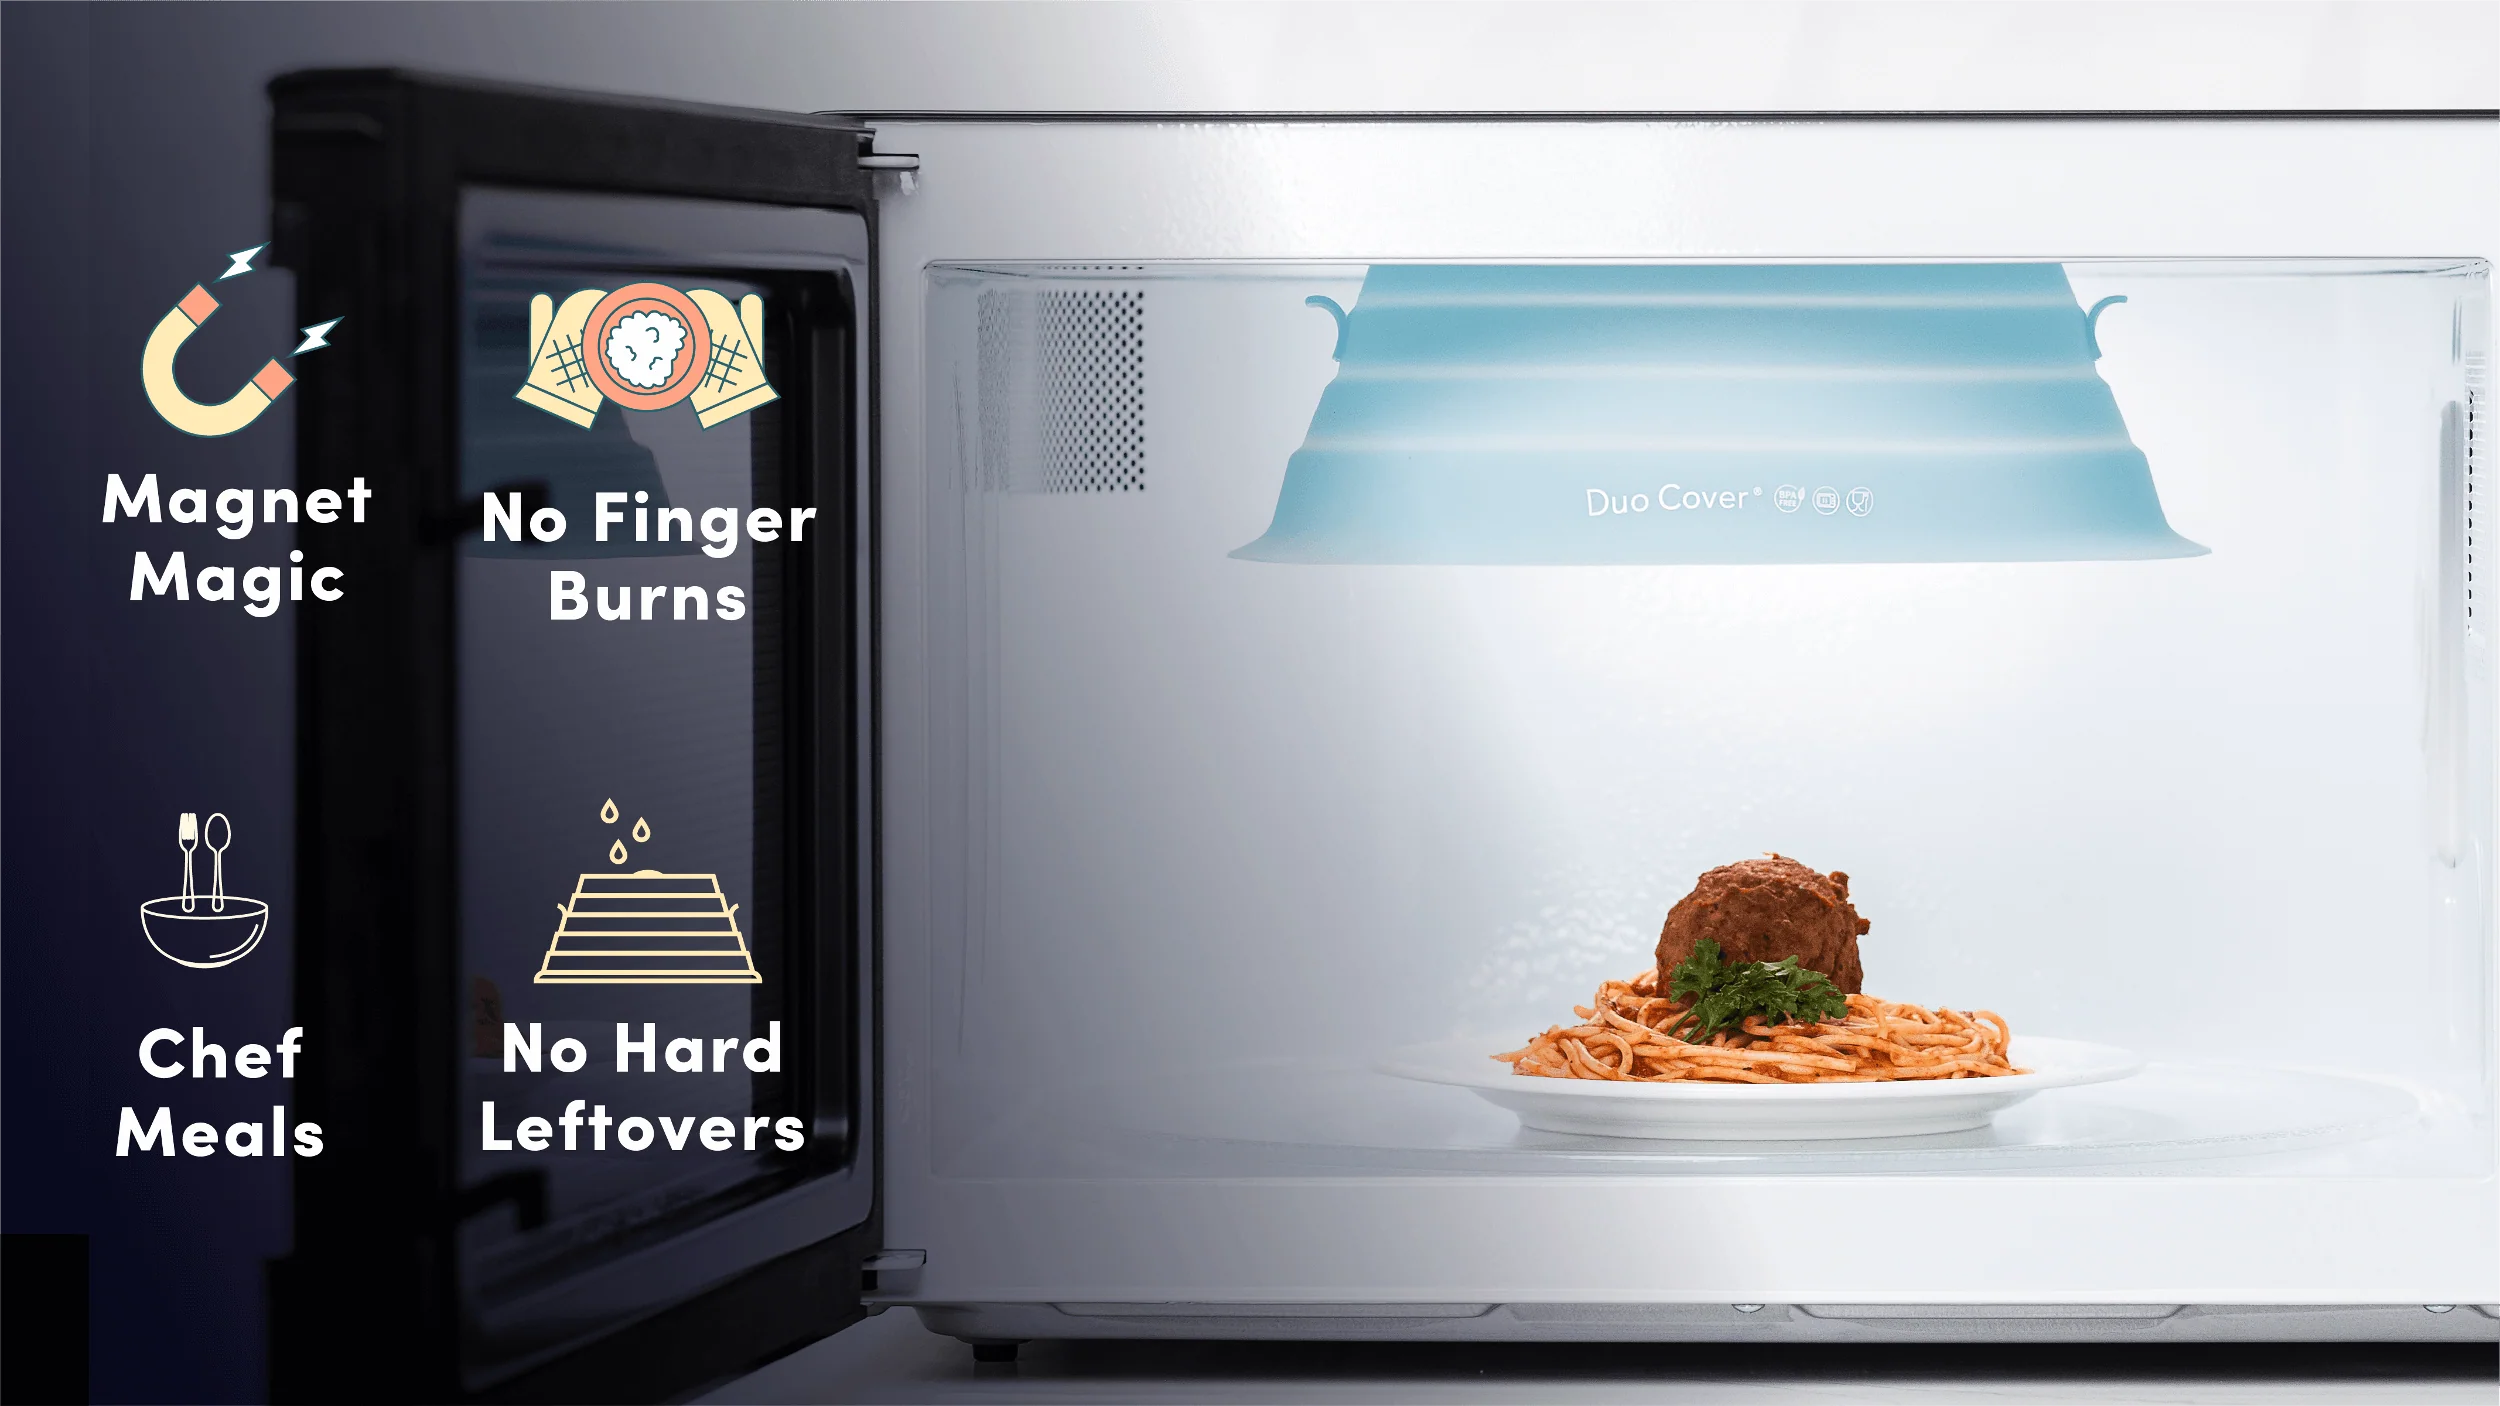 It's True – This Revolutionary New Device Makes Your Leftovers Taste INCREDIBLE